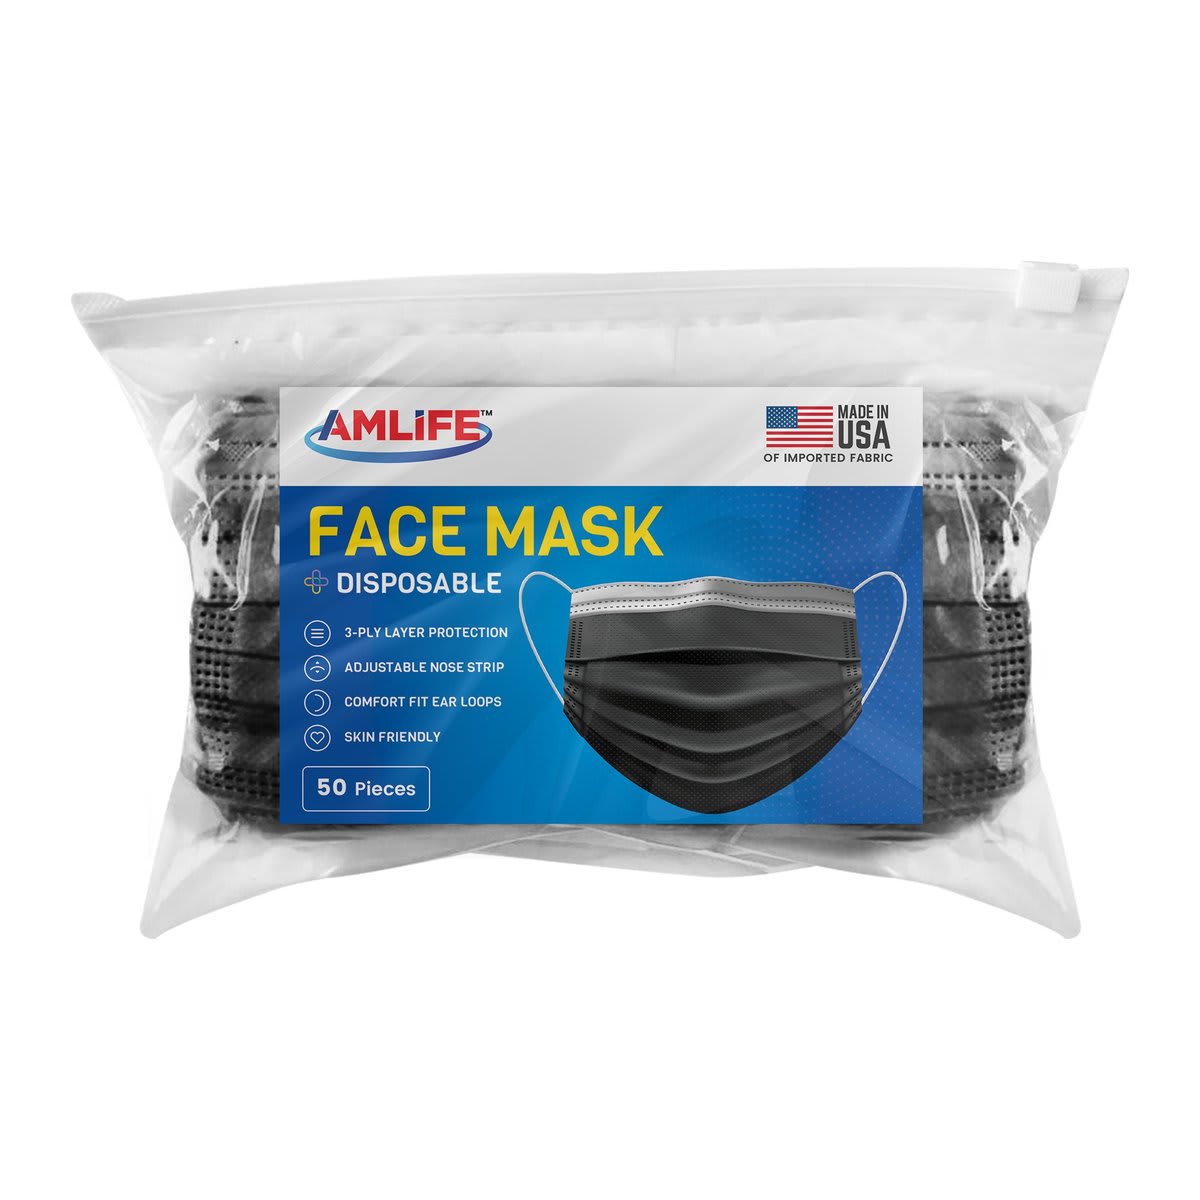 AMLIFE 50 Pack Black Face Masks 3-Ply Filter - Made in USA with Import